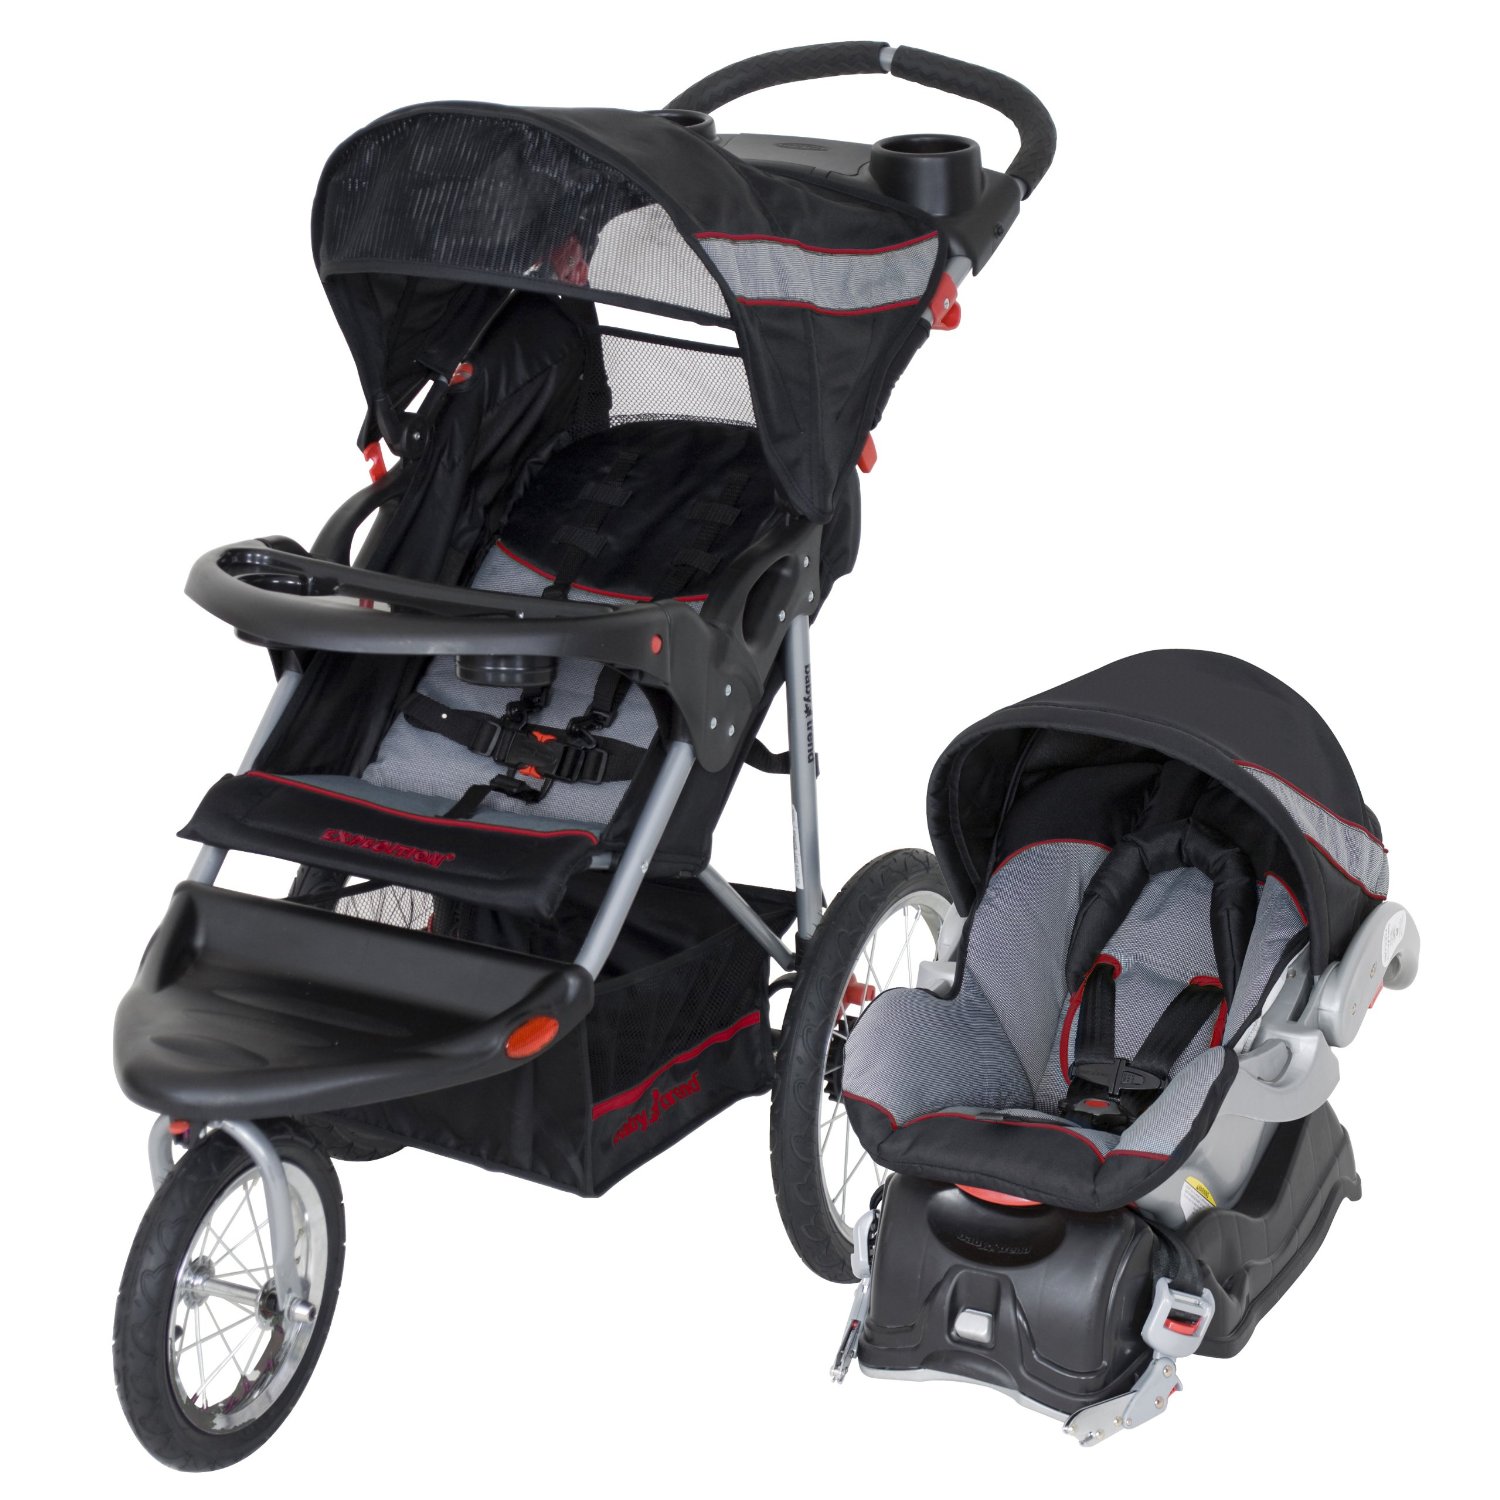 #7. Baby Trend Expedition LX Stroller